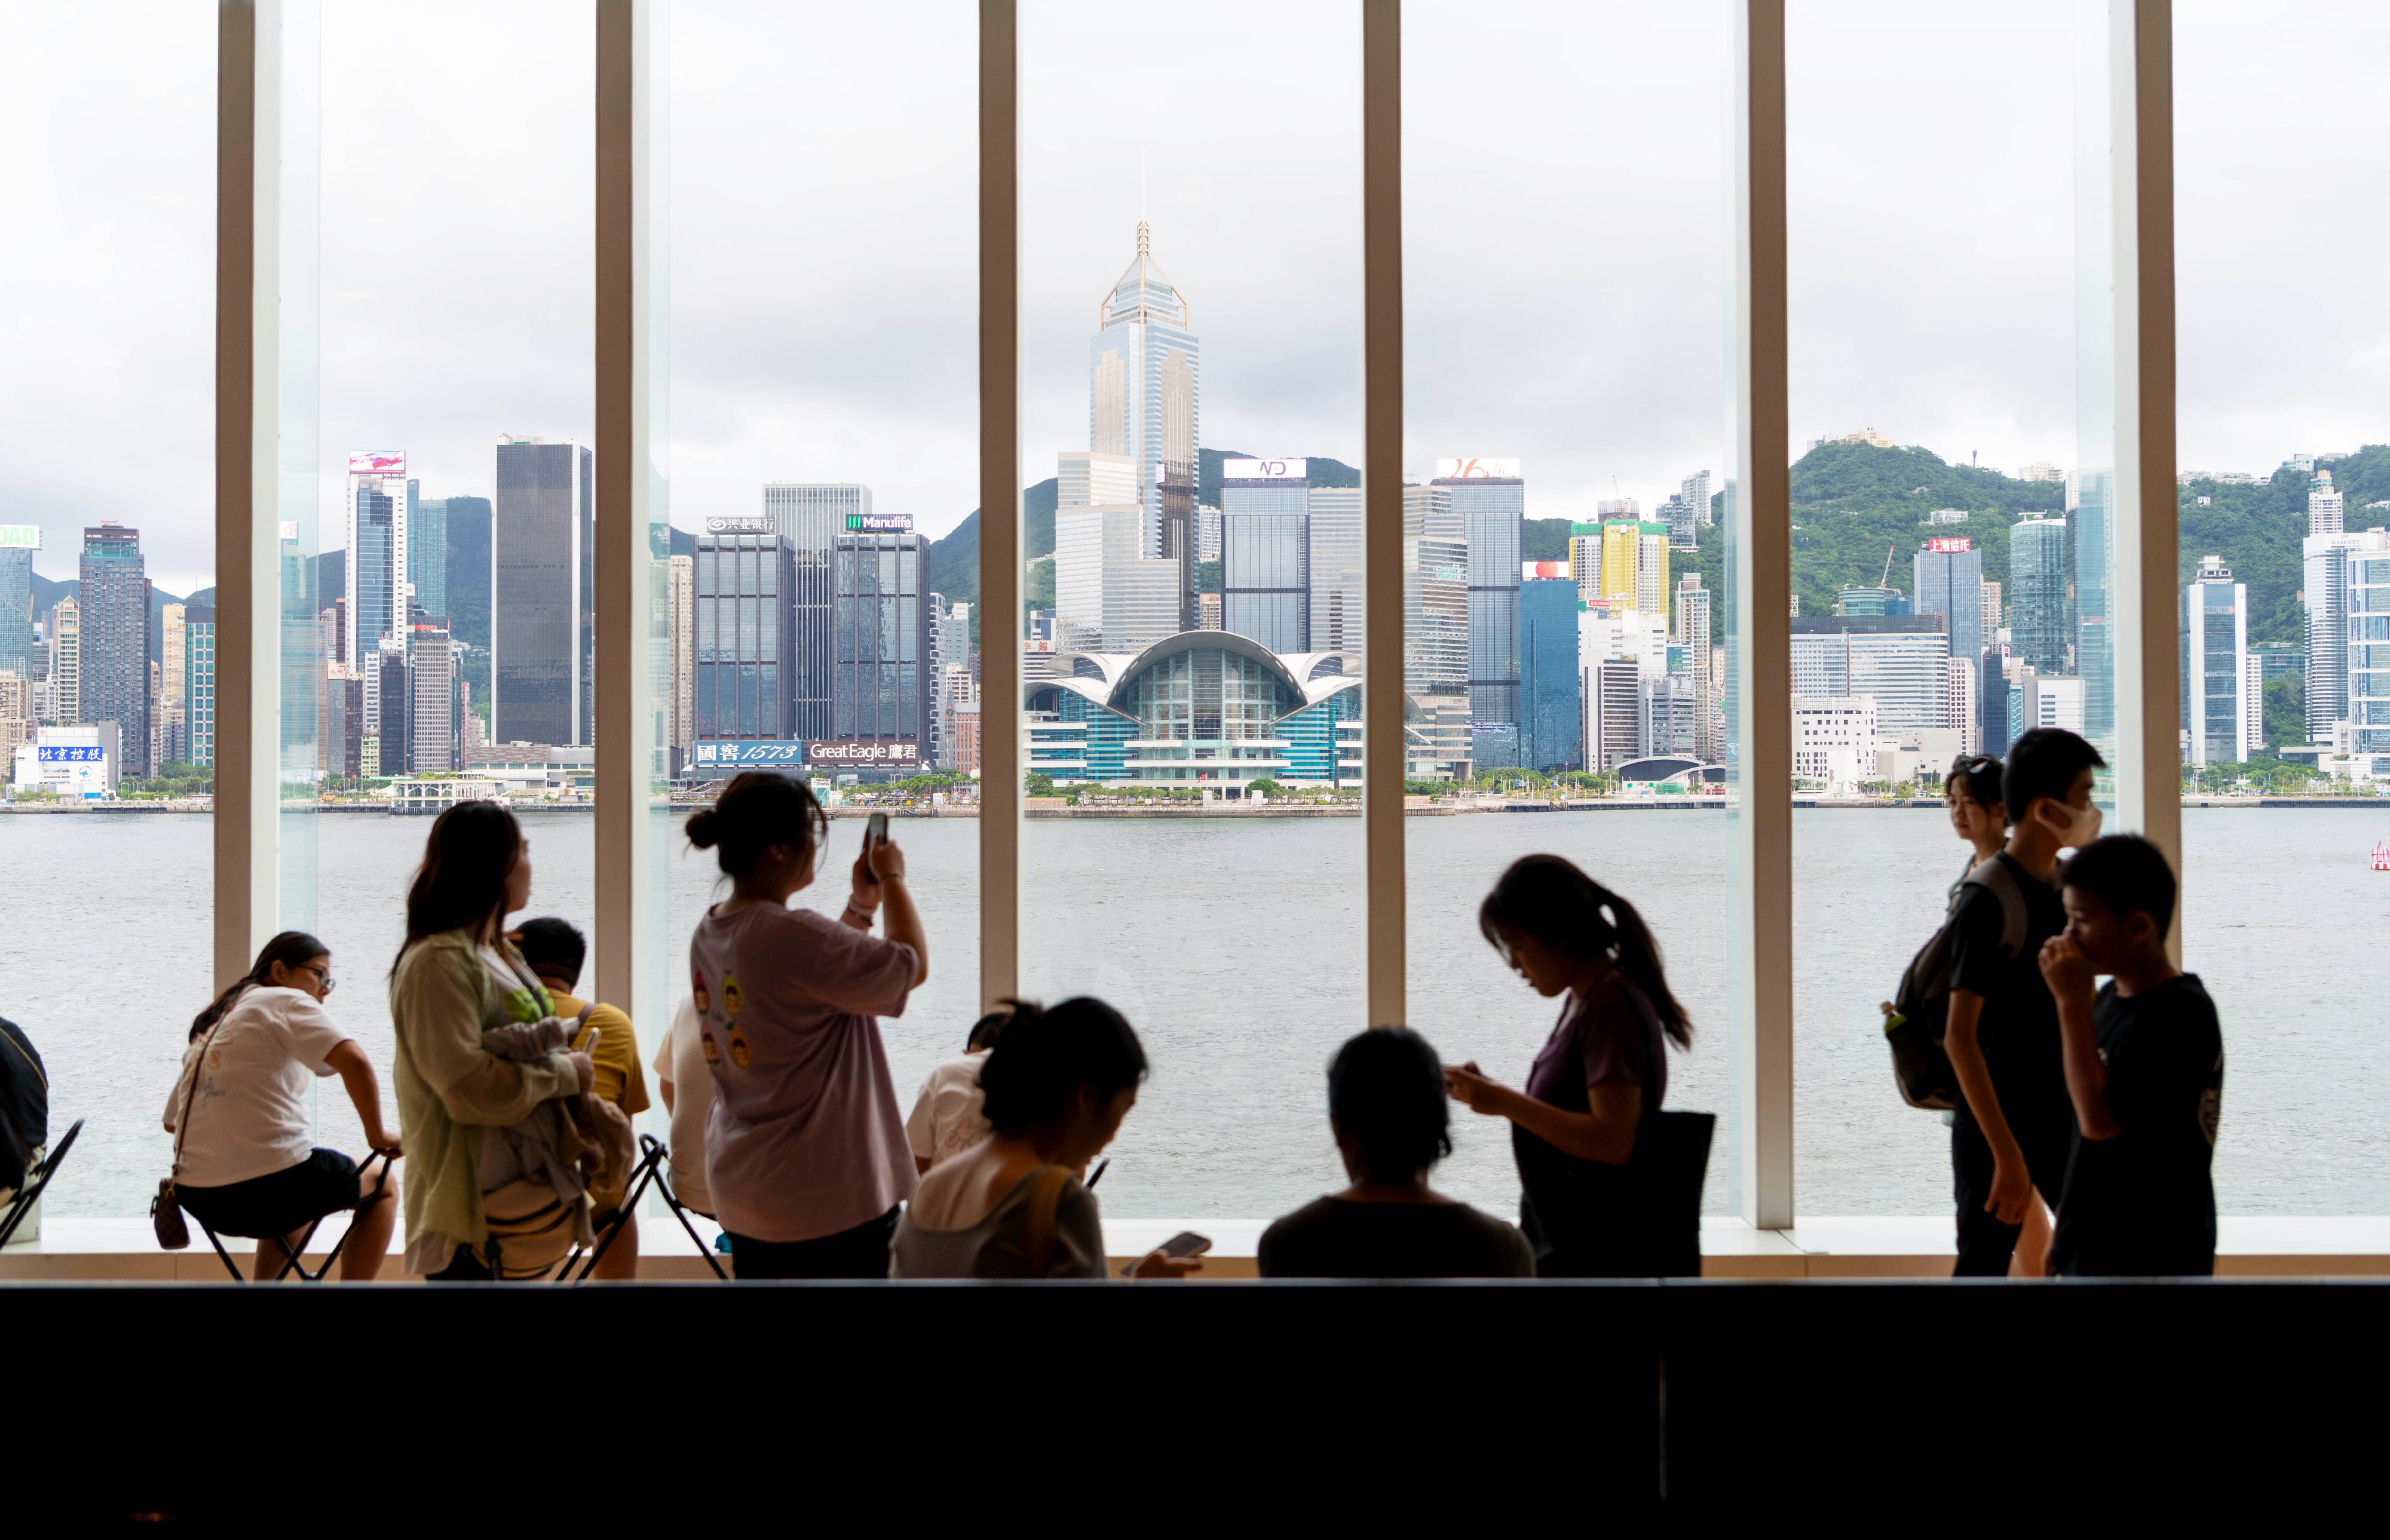 The Hong Kong Museum of Art (HKMoA) of the Leisure and Cultural Services Department has been popular among the local public and tourists. The number of visitors has reached a new high since its reopening after a major renovation in 2019 and the HKMoA welcomed its 2,000,000th visitor today (August 12). The floor-to-ceiling windows on each floor of the HKMoA also allow visitors to enjoy an iconic "art piece" of Hong Kong, Victoria Harbour, while appreciating the museum collection.